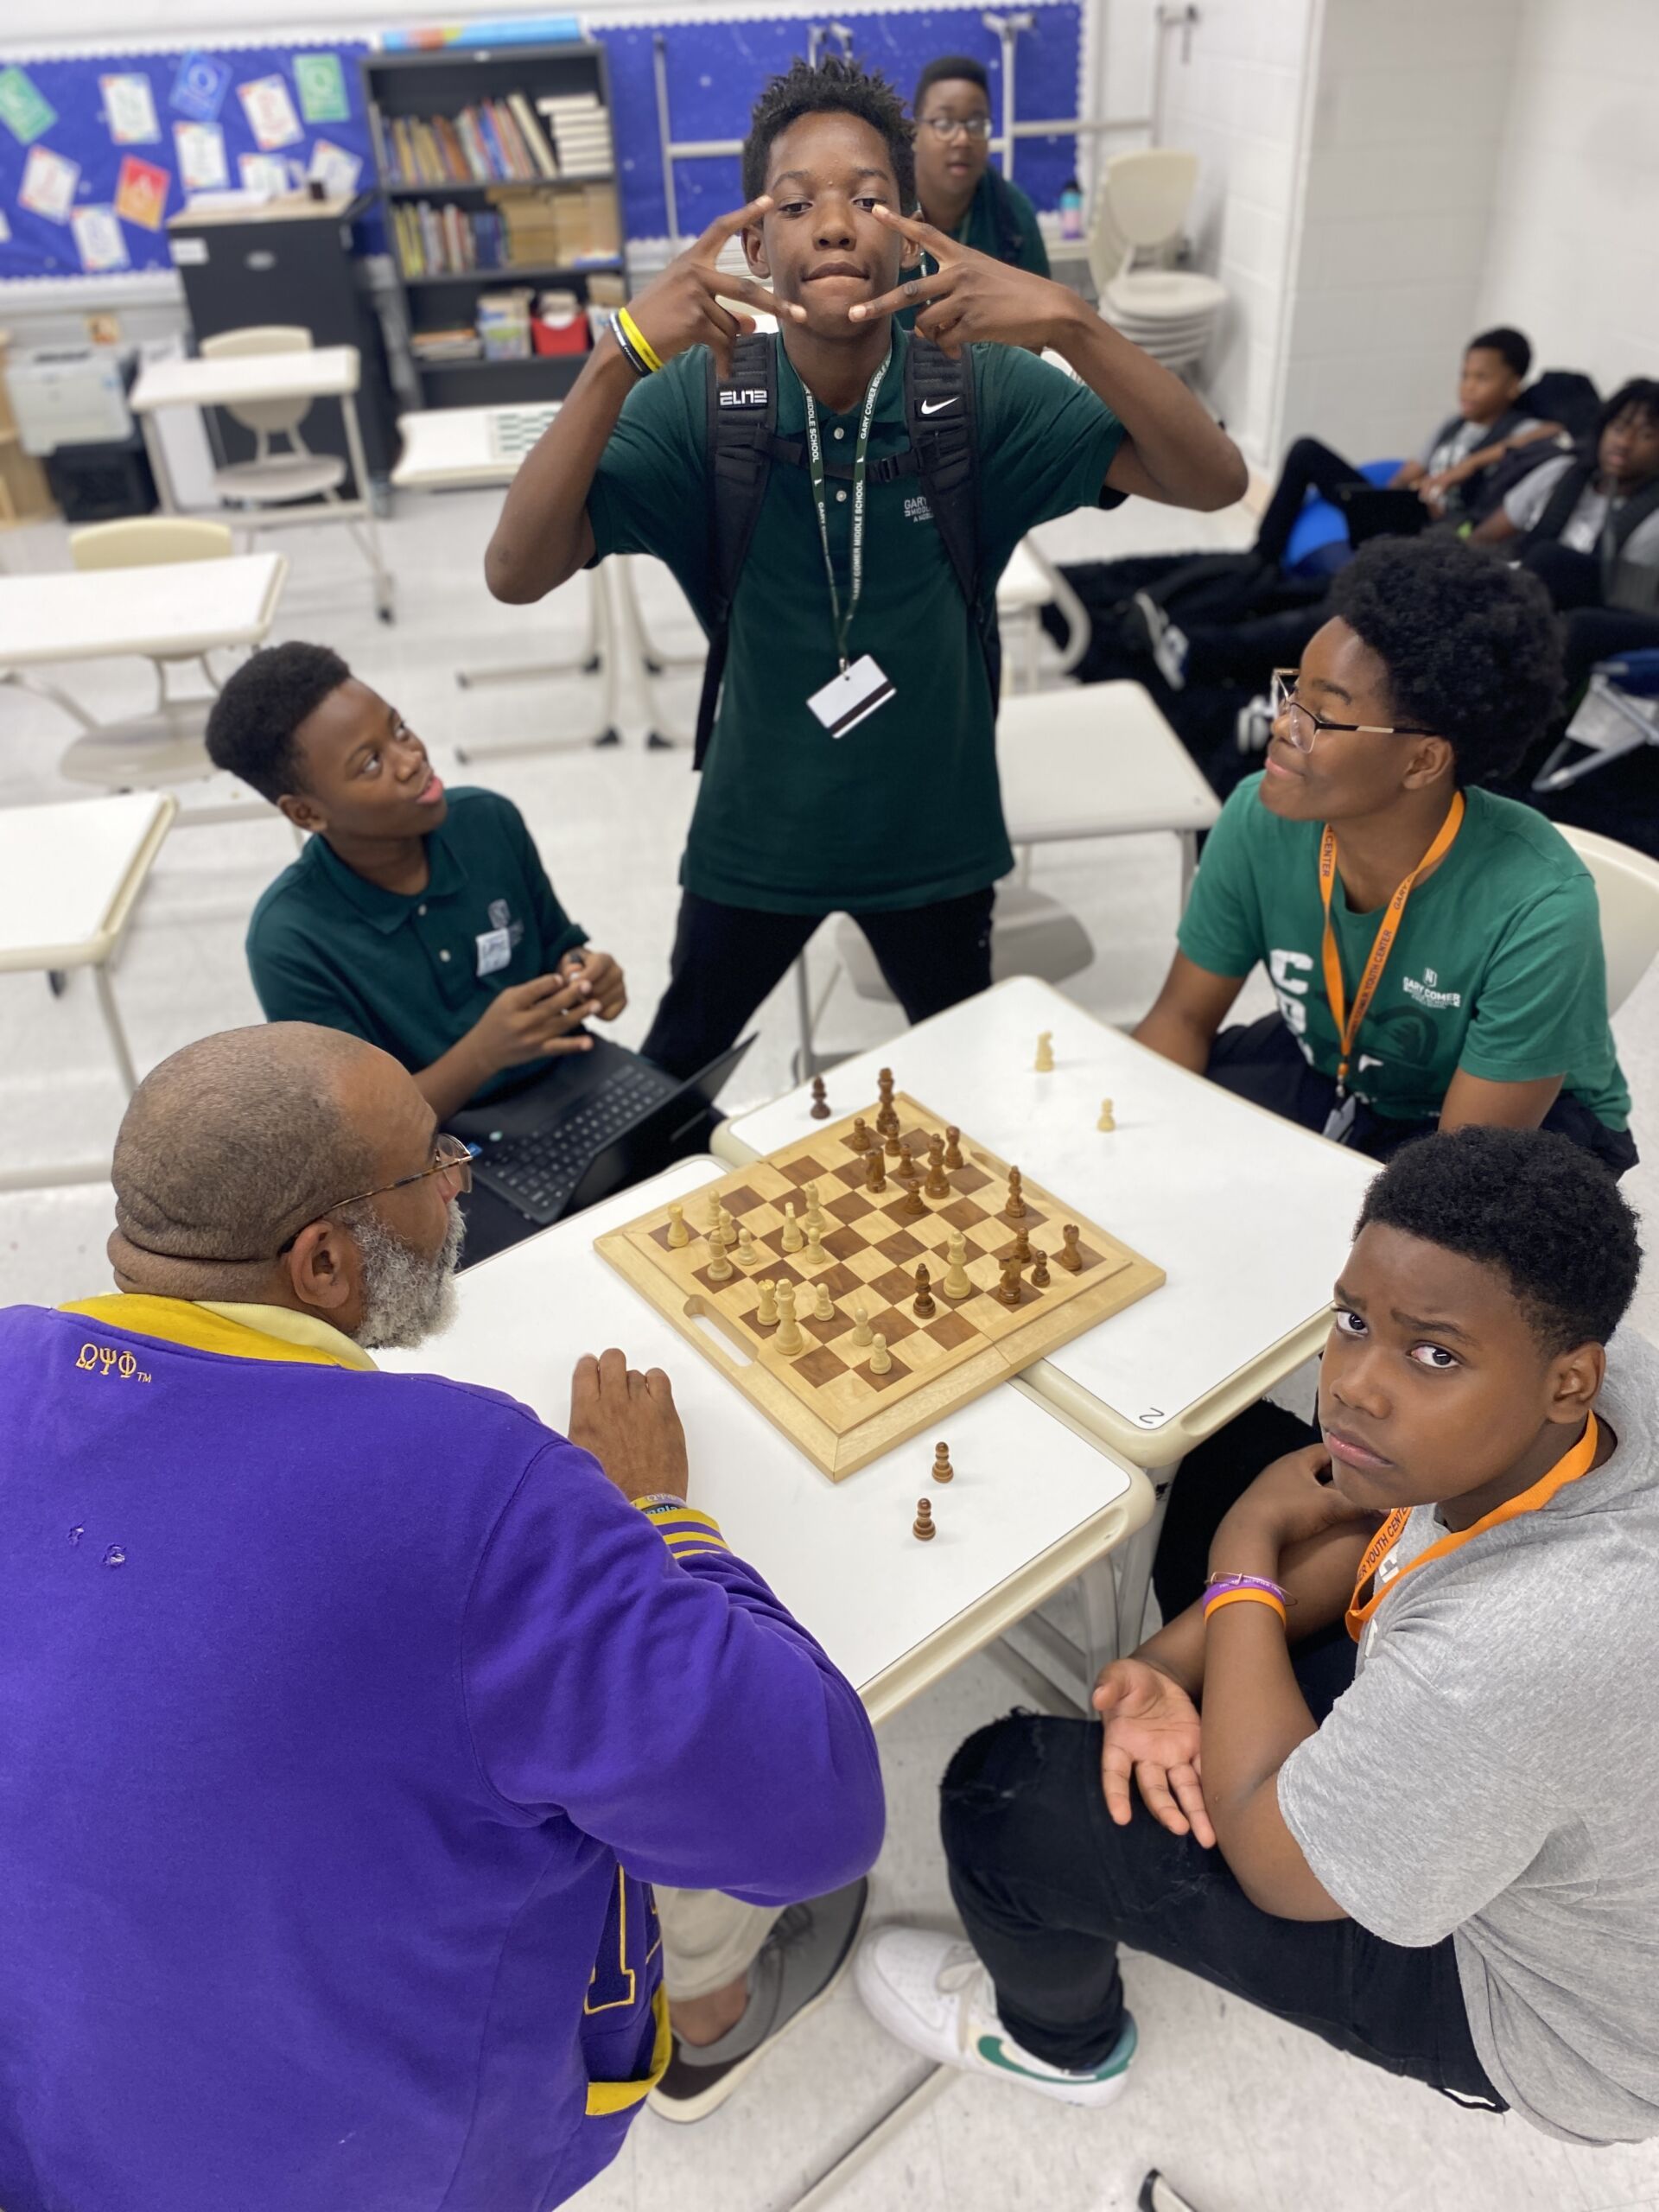 Mr. Brady, Octavius, Khari, and Trenton sit together and play chess. Just throws up two peace signs as he poses for the picture.